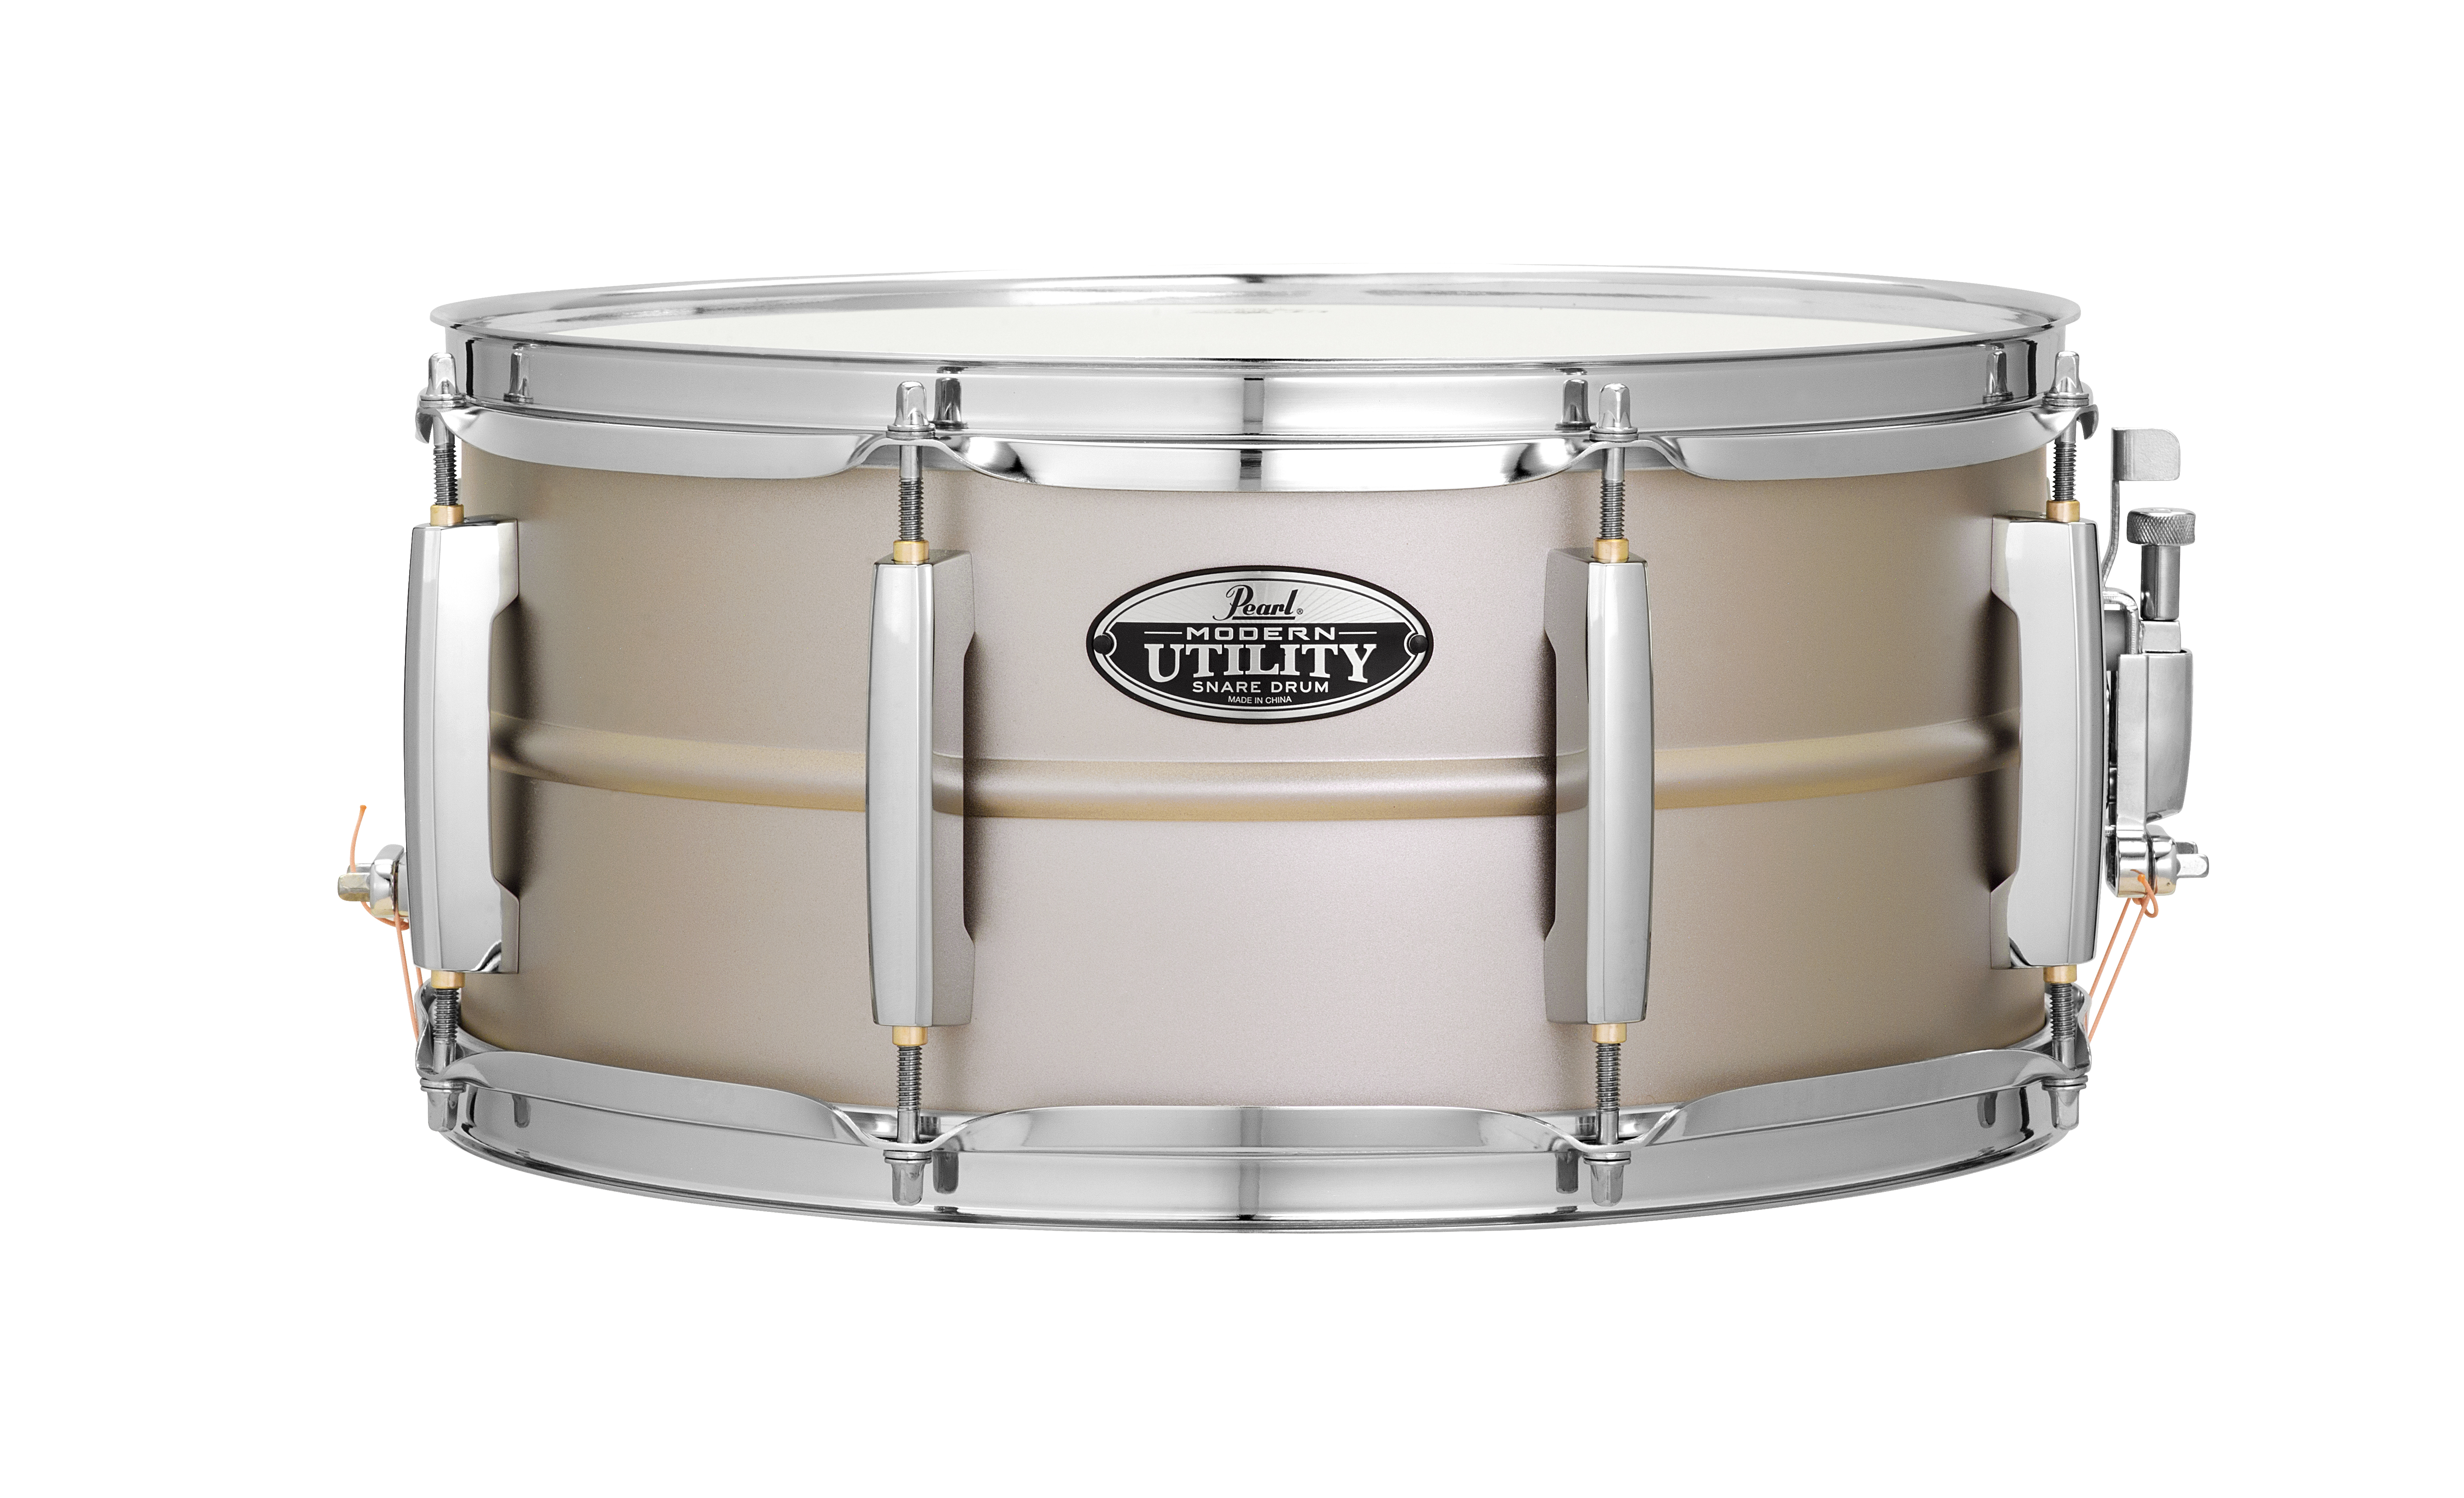 Steel Utility 14X6.5 | Pearl Drums -Official site-